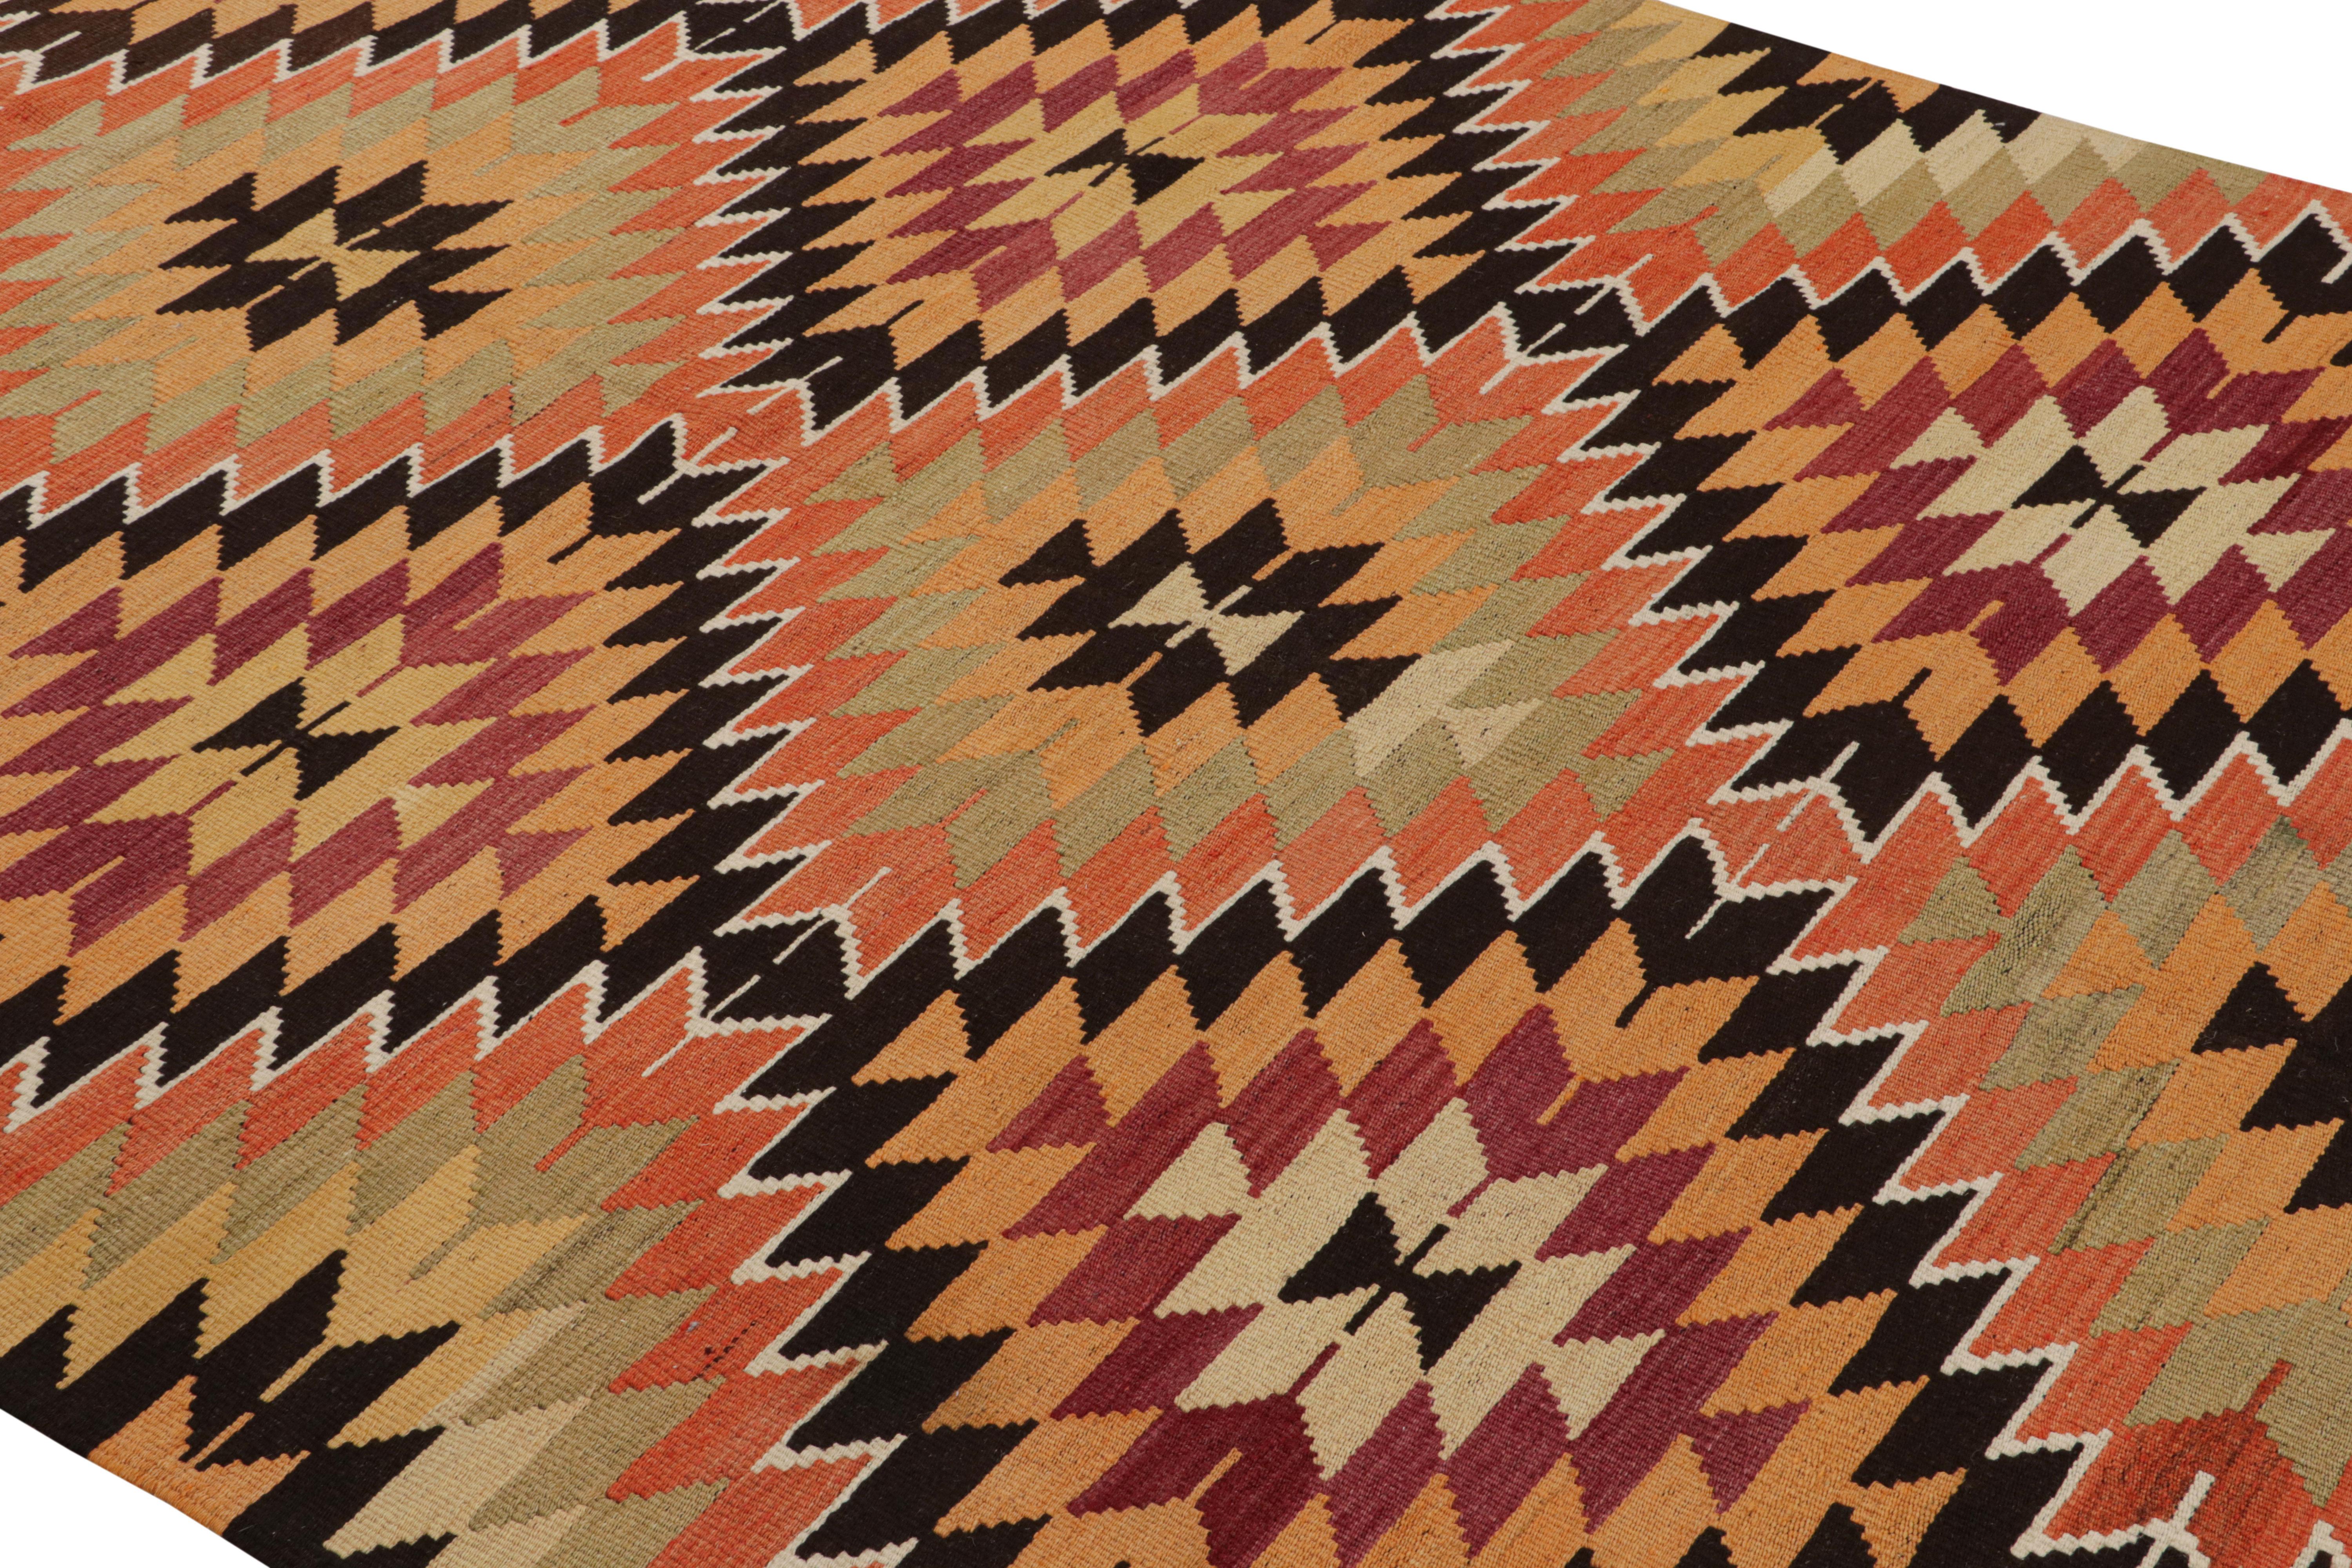 Handwoven in Turkey originating between 1950-1960, this vintage midcentury 6’ x 10’ wool Kilim hails from the town of Mut near the Mediterranean, a very diverse and nomadic locale for rarity in flat-weave rugs. This piece shows a unique and skilful